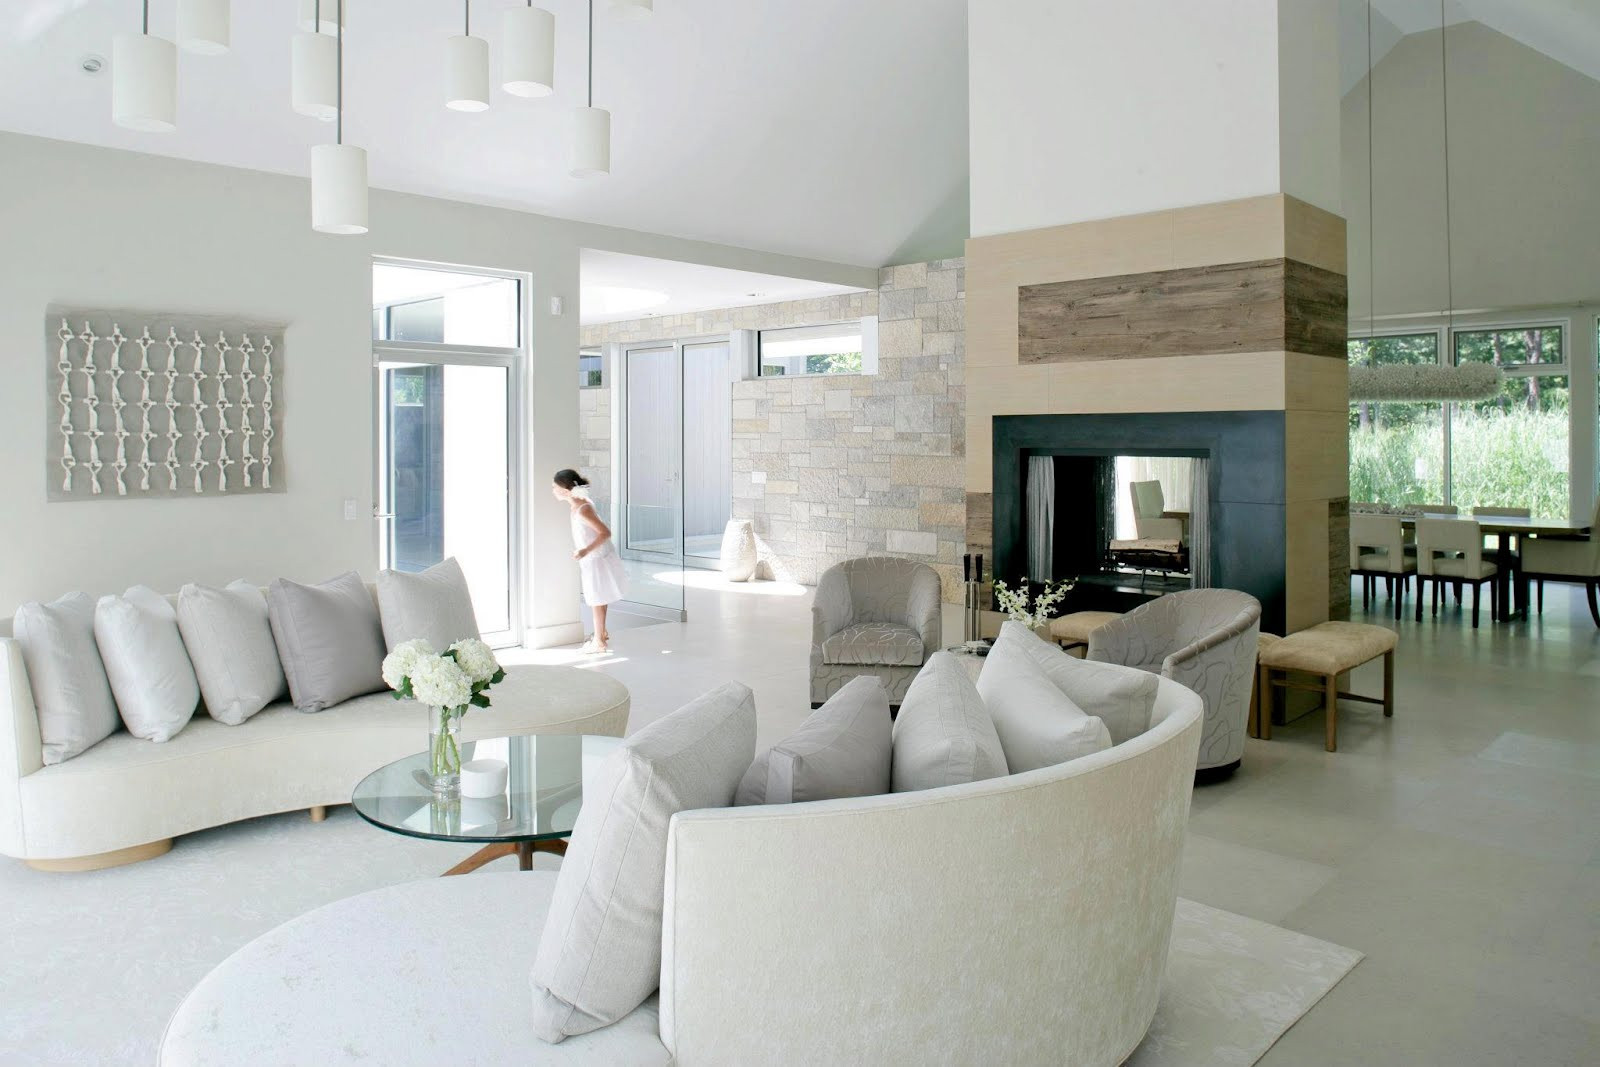 Modern White Living Room Furniture
 SEE THIS HOUSE WHITE ON WHITE IN A MODERN HAMPTONS